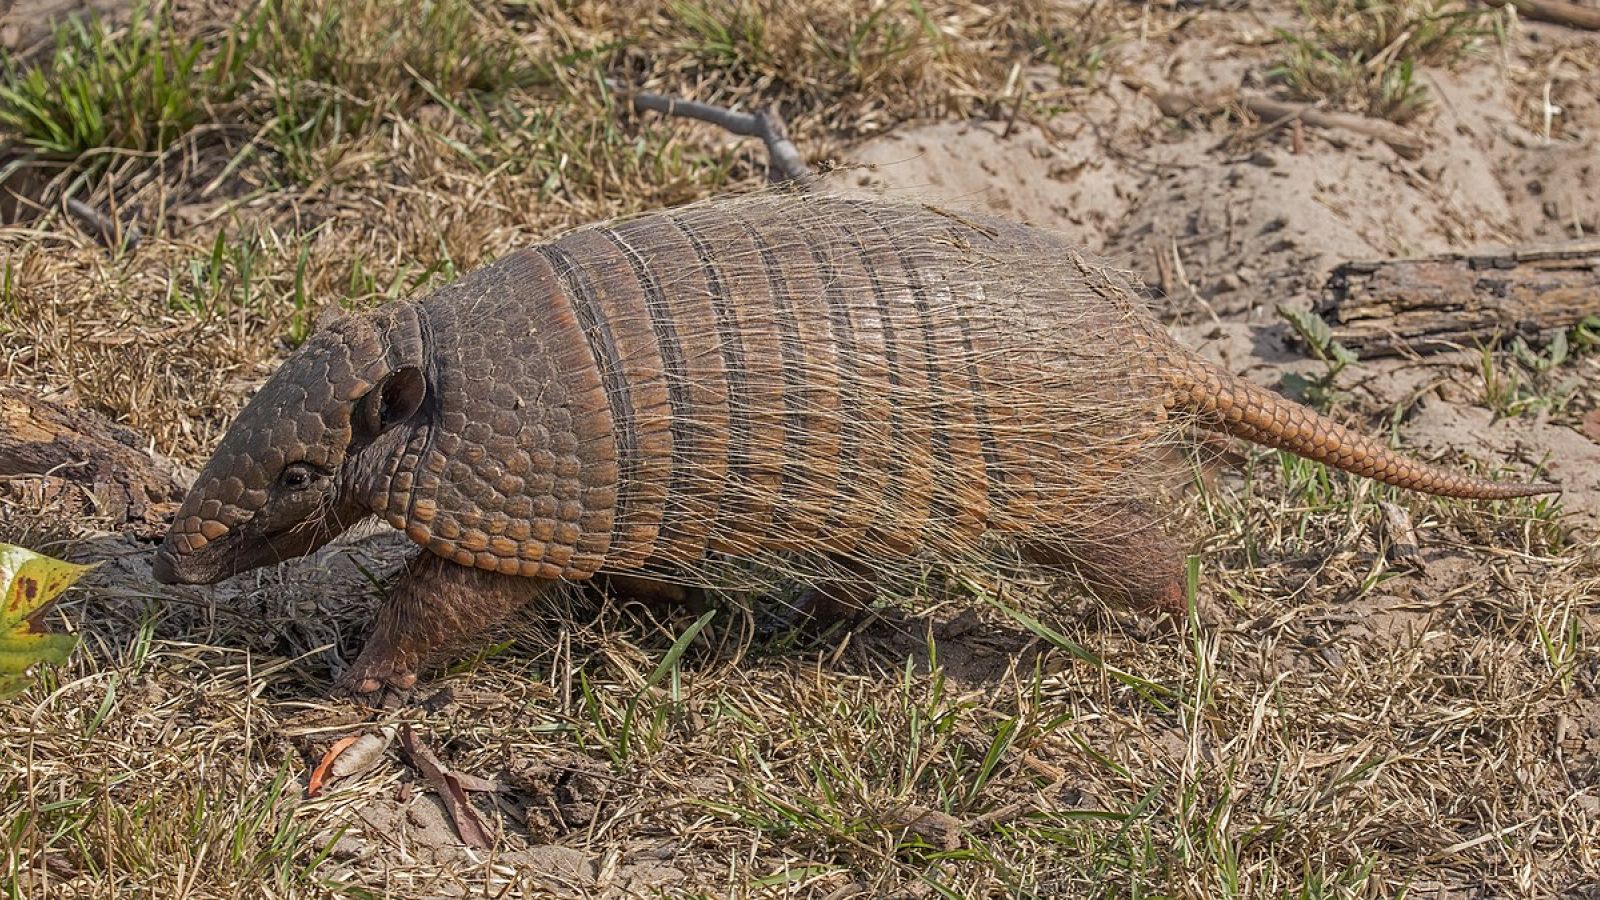 Armadillos in medical research